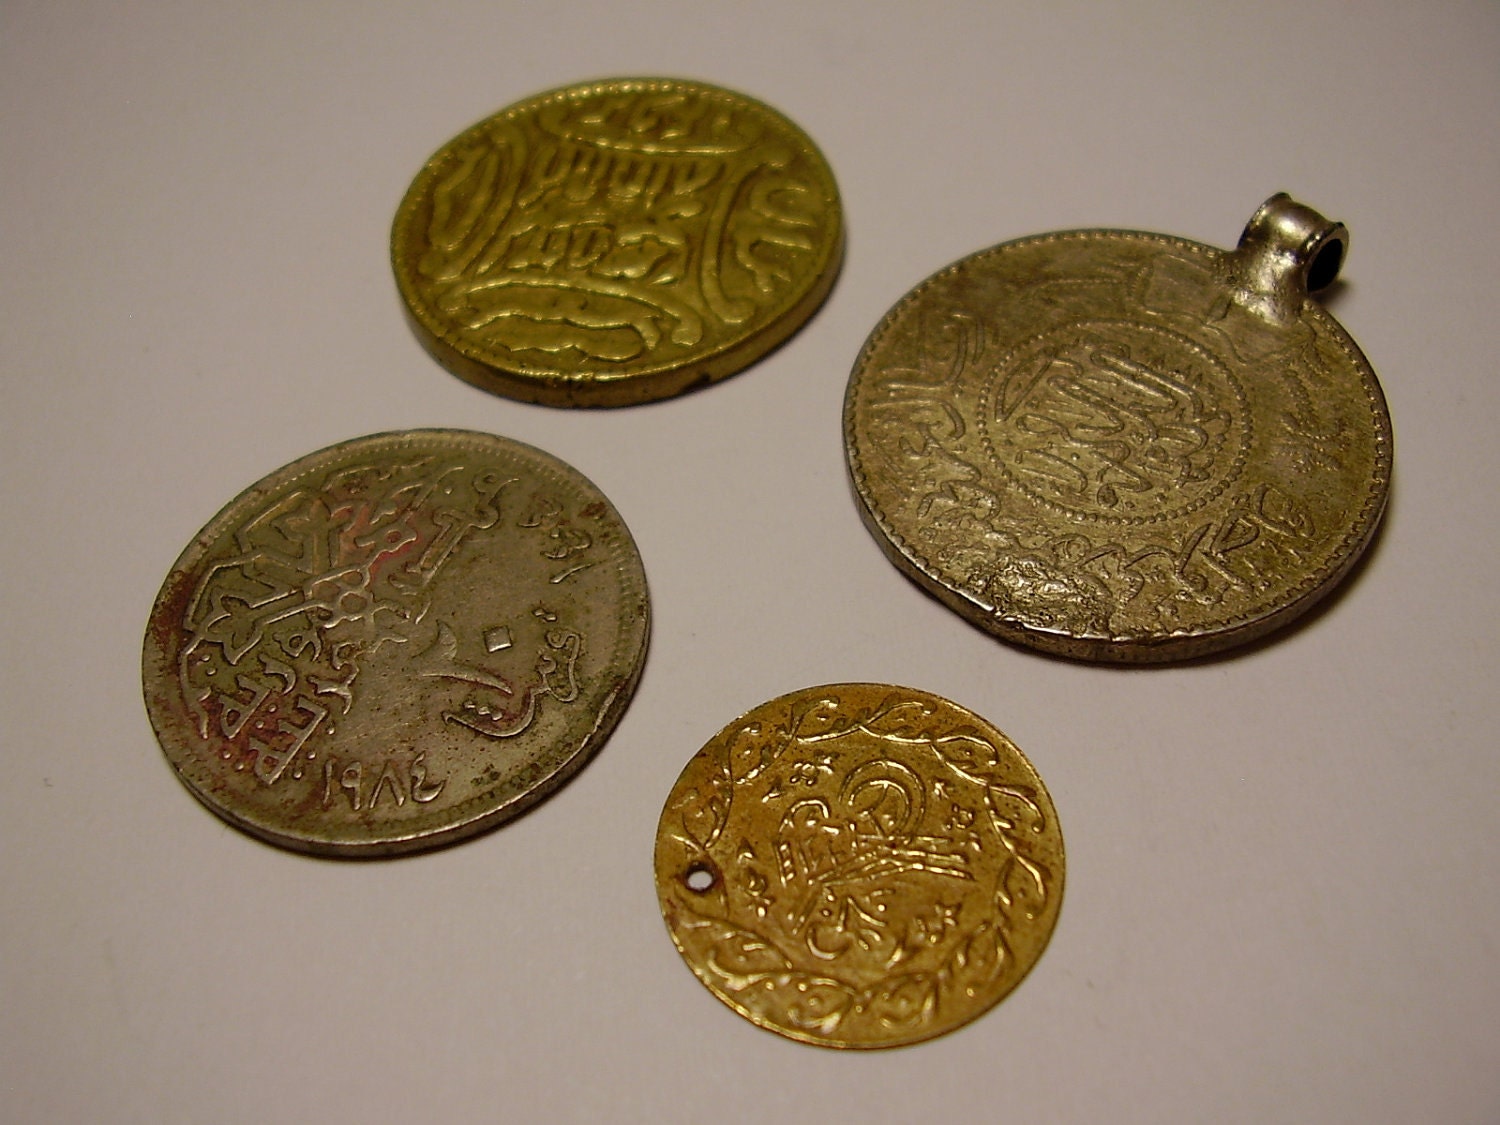 A Small Collection of Arabic Turkish Ottoman Empire Coins